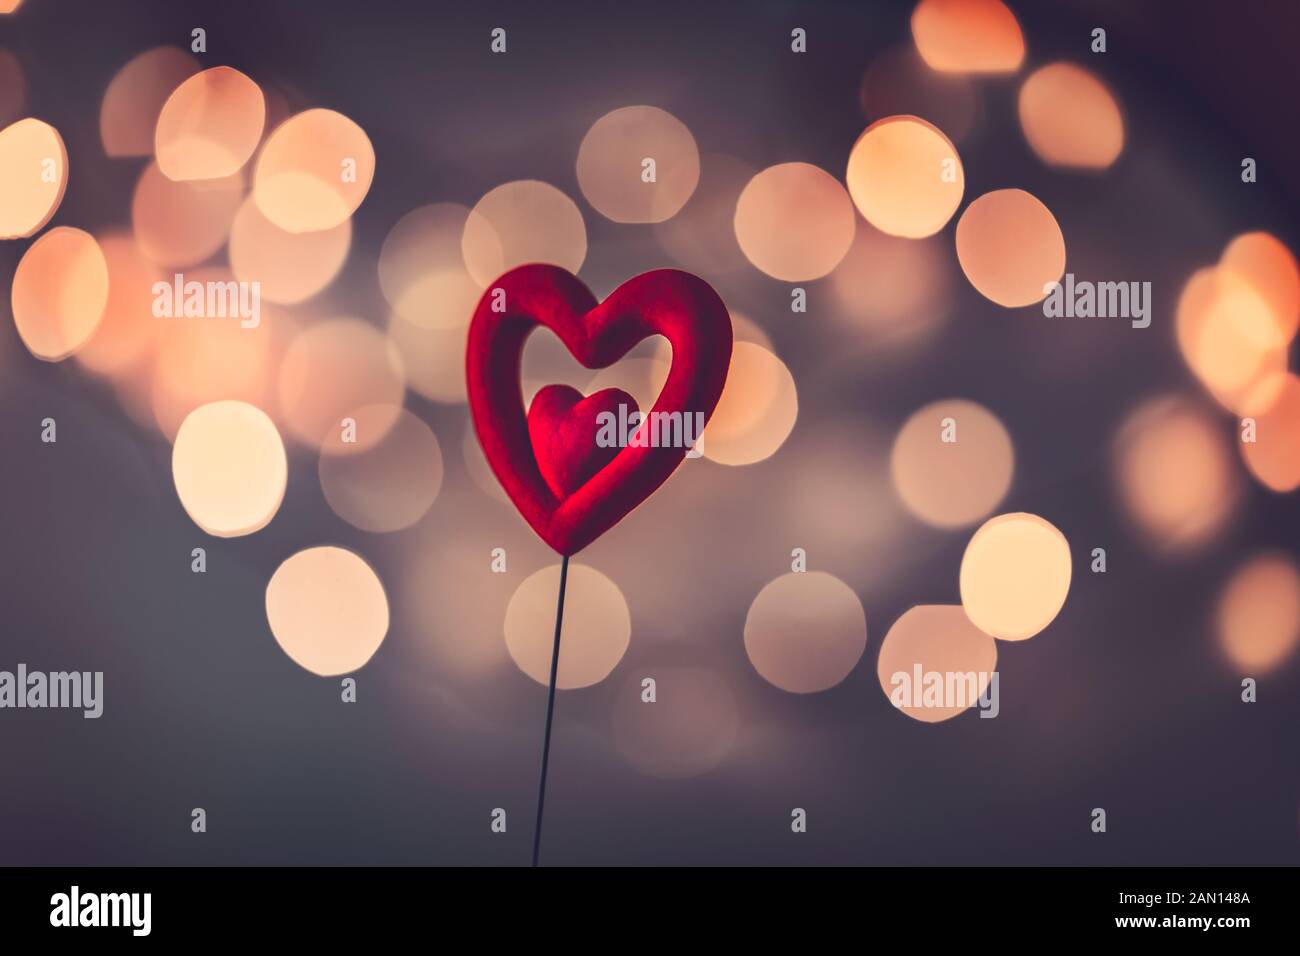 Beautiful red heart over blurry vintage bokeh background, romantic ...